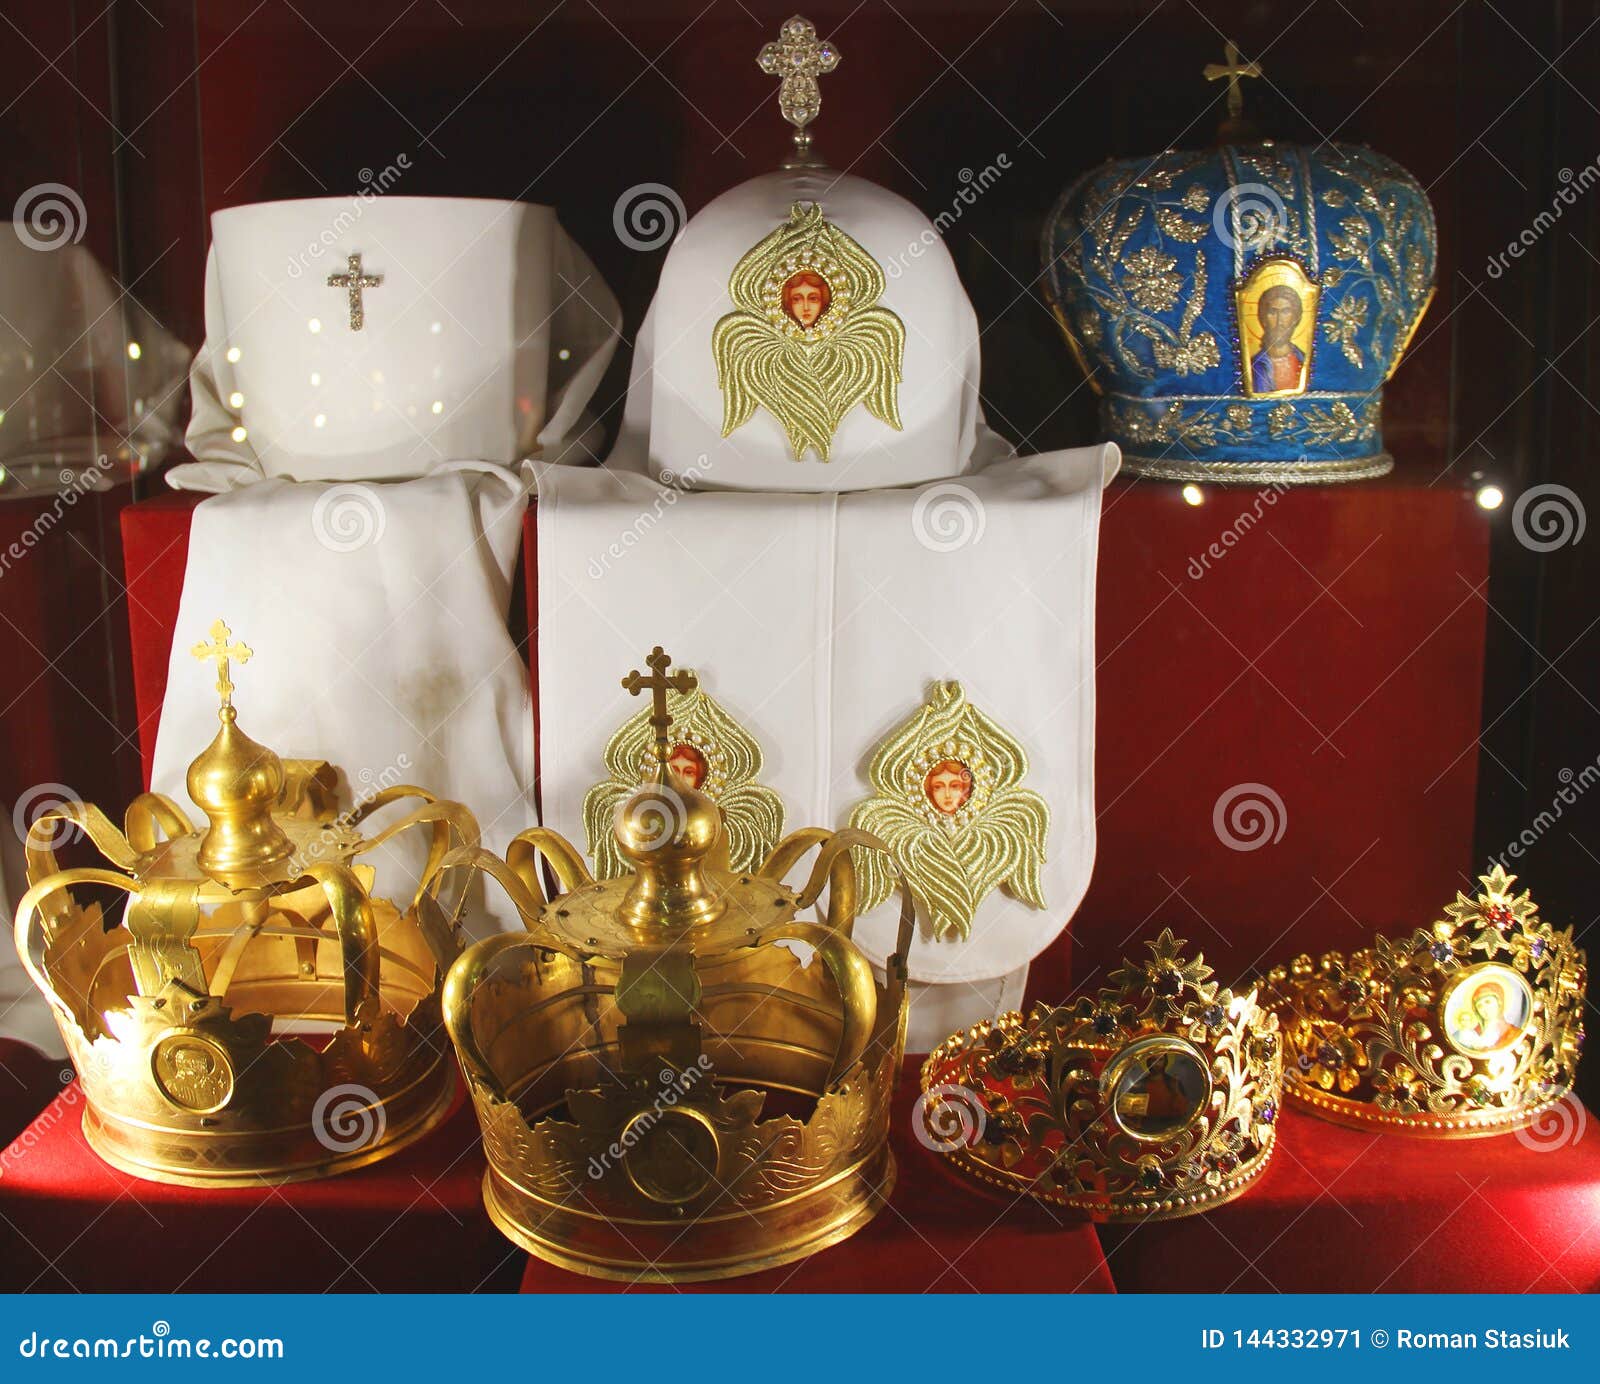 Krona- och pr. Crown and priests hats on a red background.